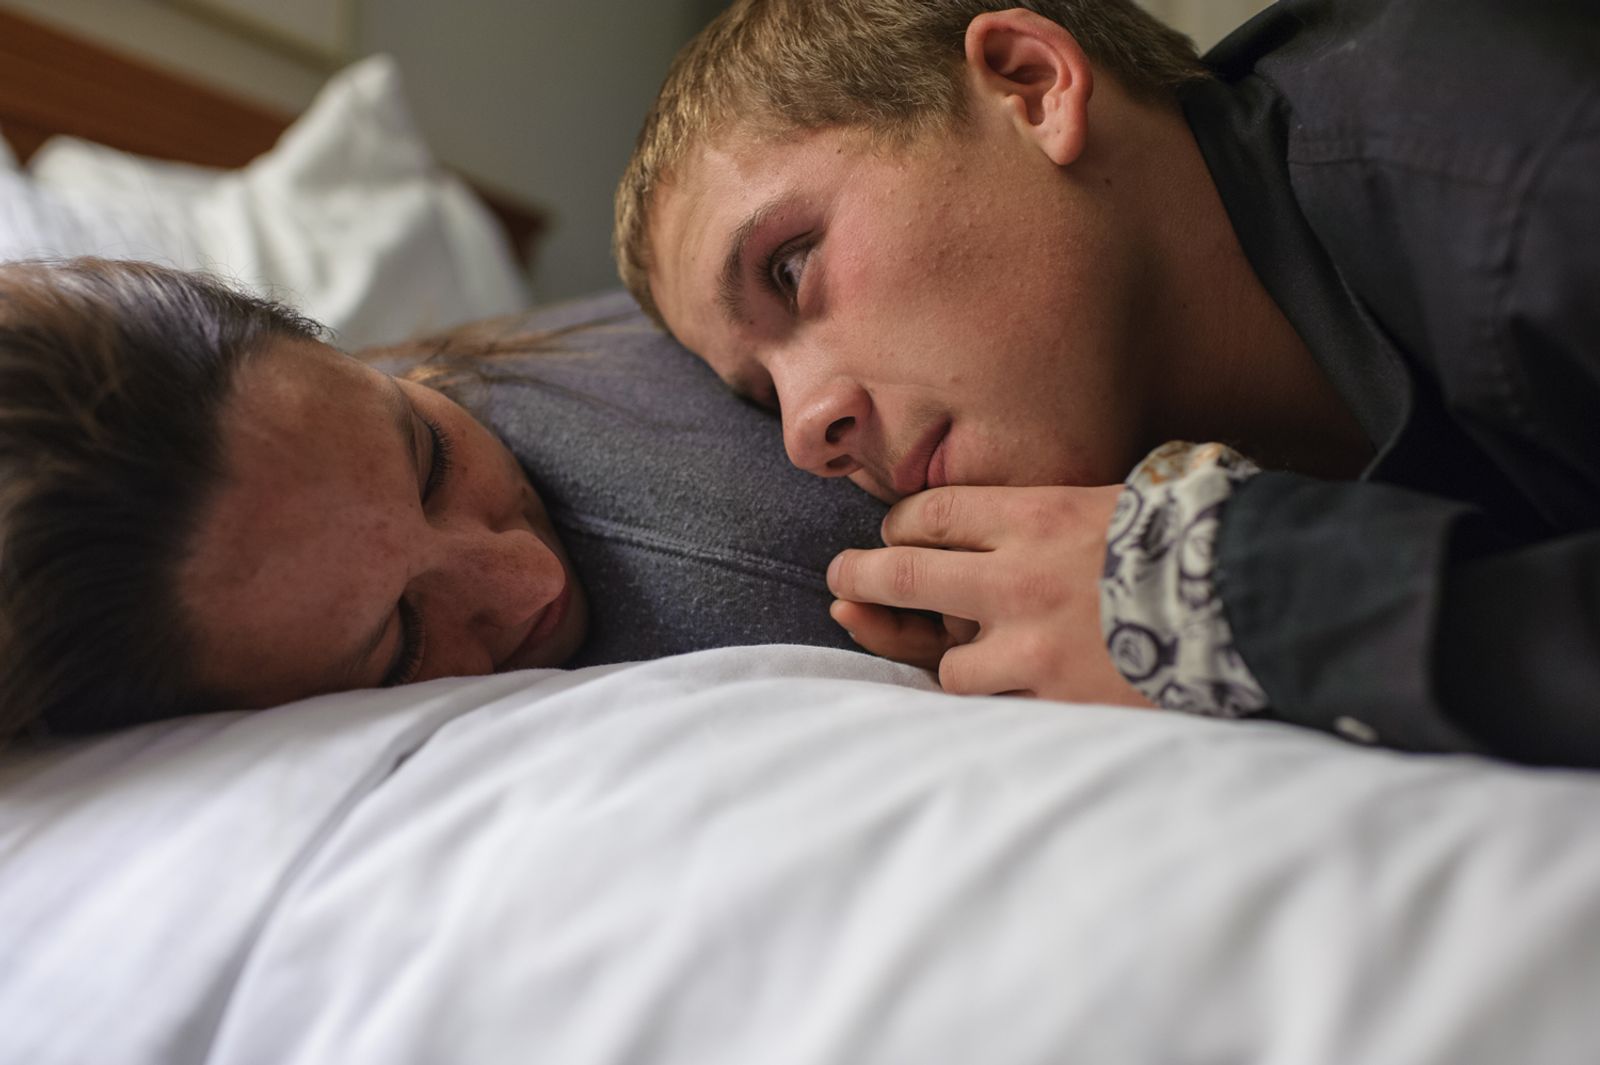 © Isadora Kosofsky - Vinny, age 16, looks at his girlfriend, Krystle, as they recline on a bed in Albuquerque, New Mexico.